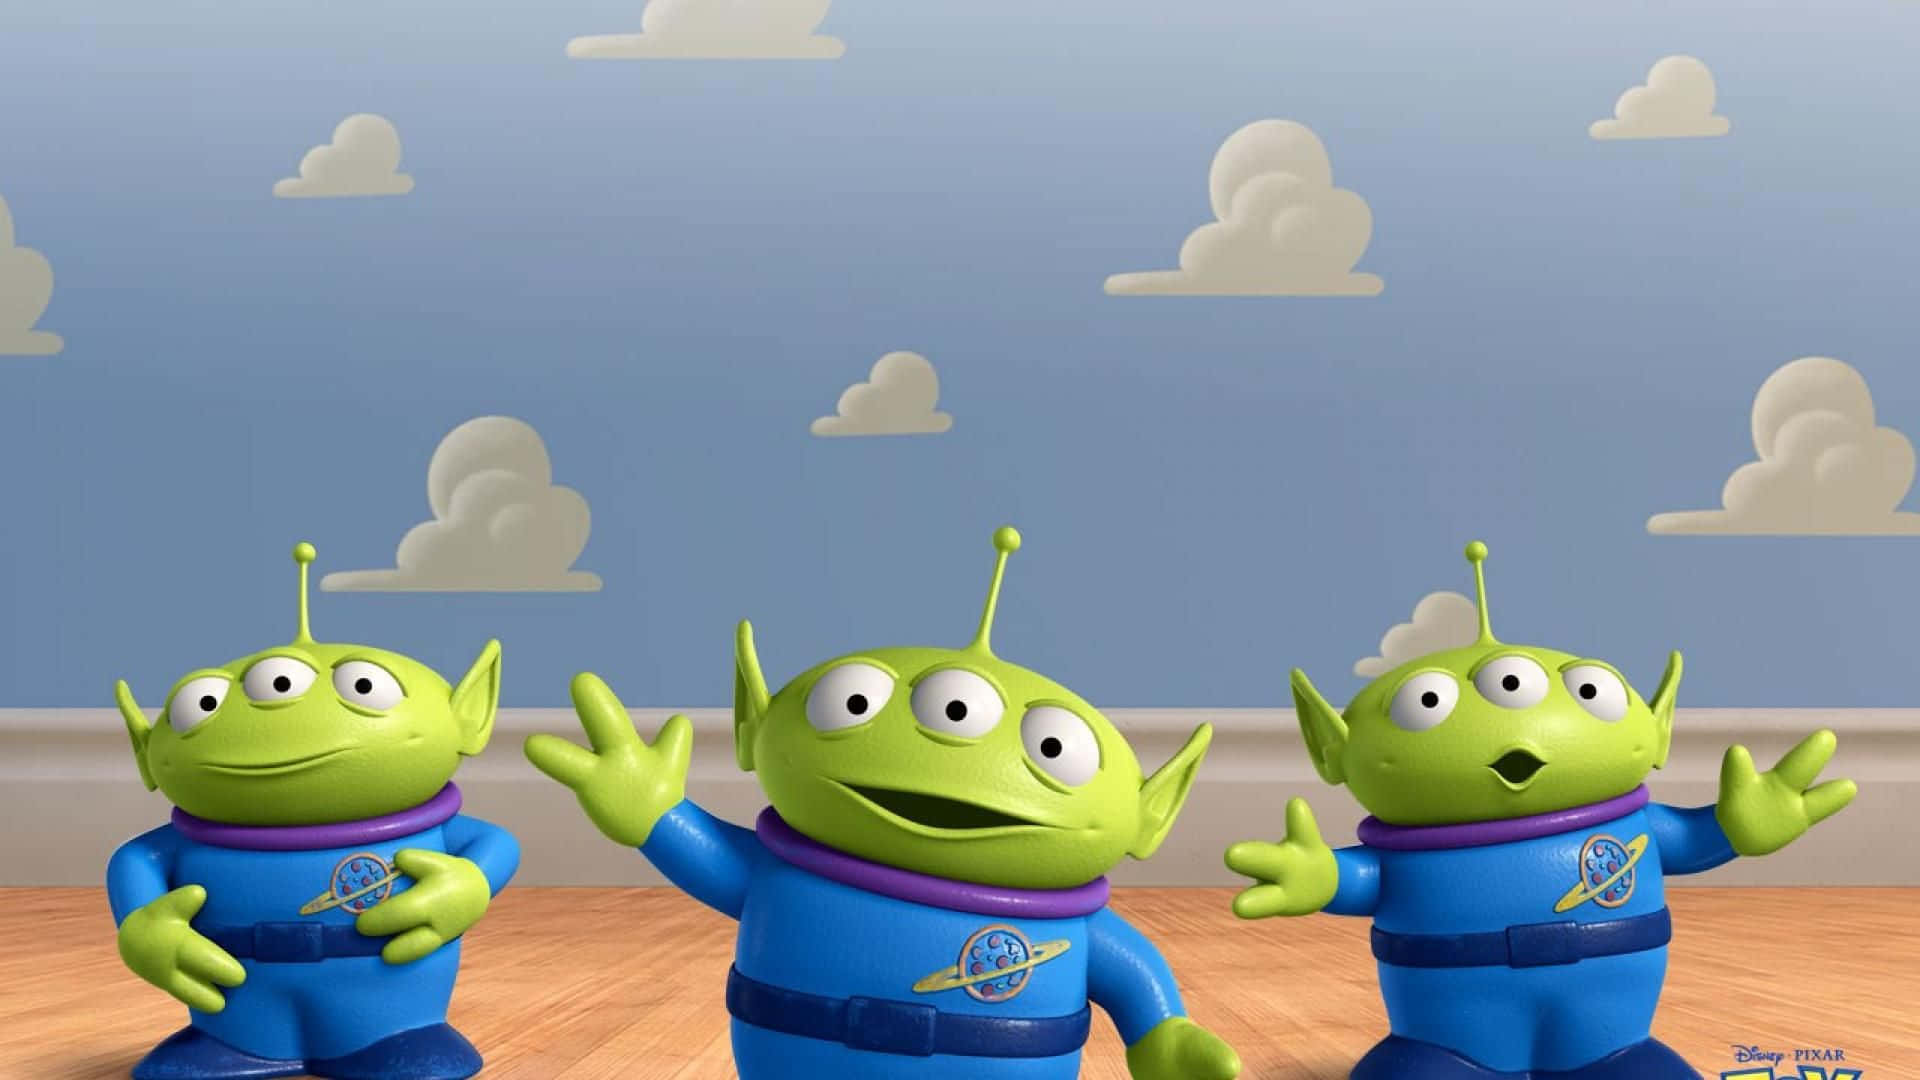 Iconic Toy Story Clouds on a Sky Blue Background